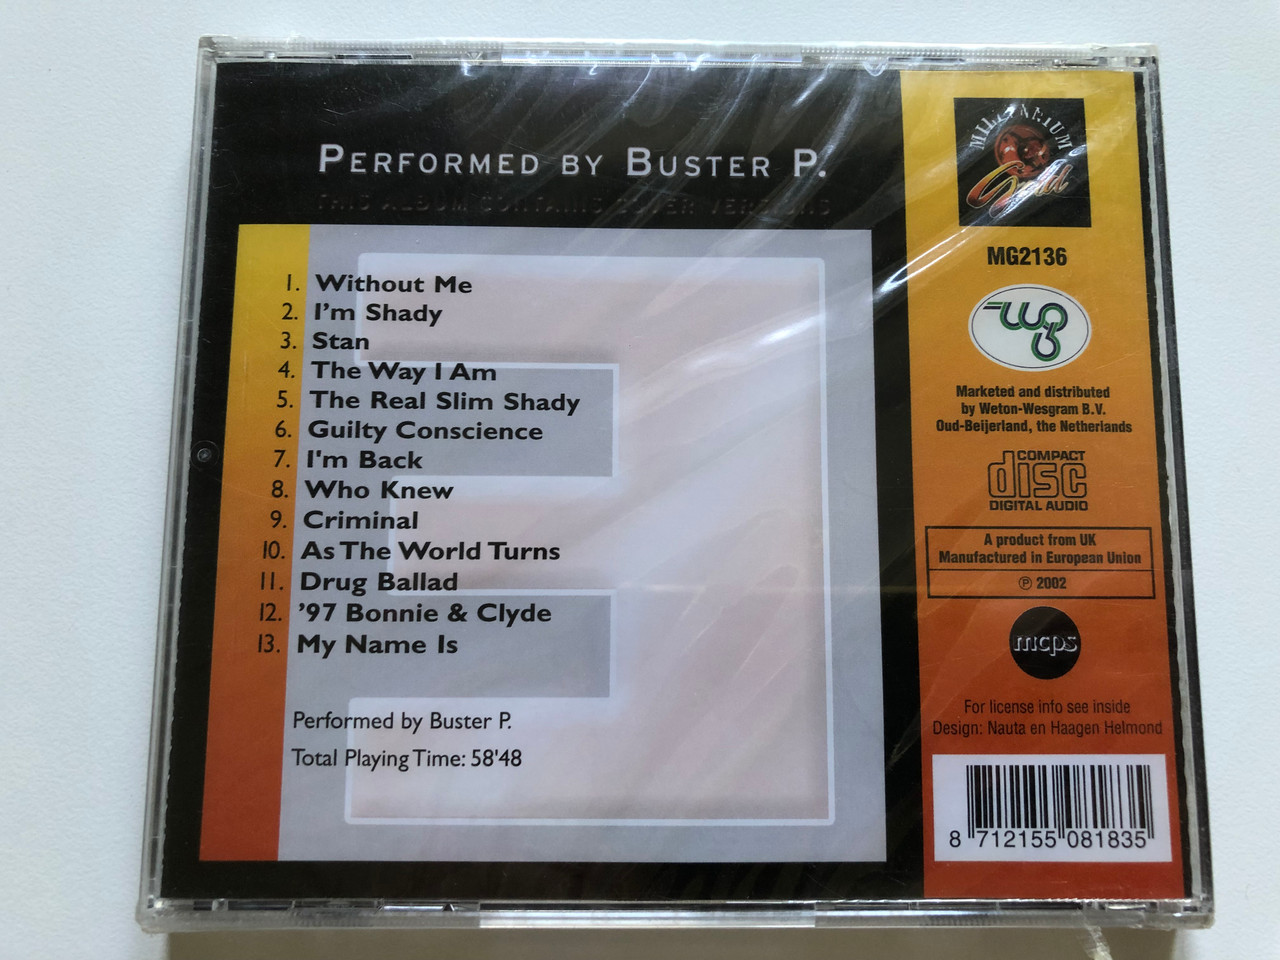 https://cdn10.bigcommerce.com/s-62bdpkt7pb/products/0/images/244301/The_Music_Of_Eminem_-_Performed_by_Buster_P._This_Album_Contains_Cover_Versions_Without_Me_Im_Shady_As_The_World_Turns_Drug_Ballad_My_Name_Is_Millennium_Gold_Audio_CD_2002_MG2136___41877.1659364010.1280.1280.JPG?c=2&_gl=1*jt60ap*_ga*MjA2NTIxMjE2MC4xNTkwNTEyNTMy*_ga_WS2VZYPC6G*MTY1OTM2MTk0MC41MDcuMS4xNjU5MzYzNzQyLjIx